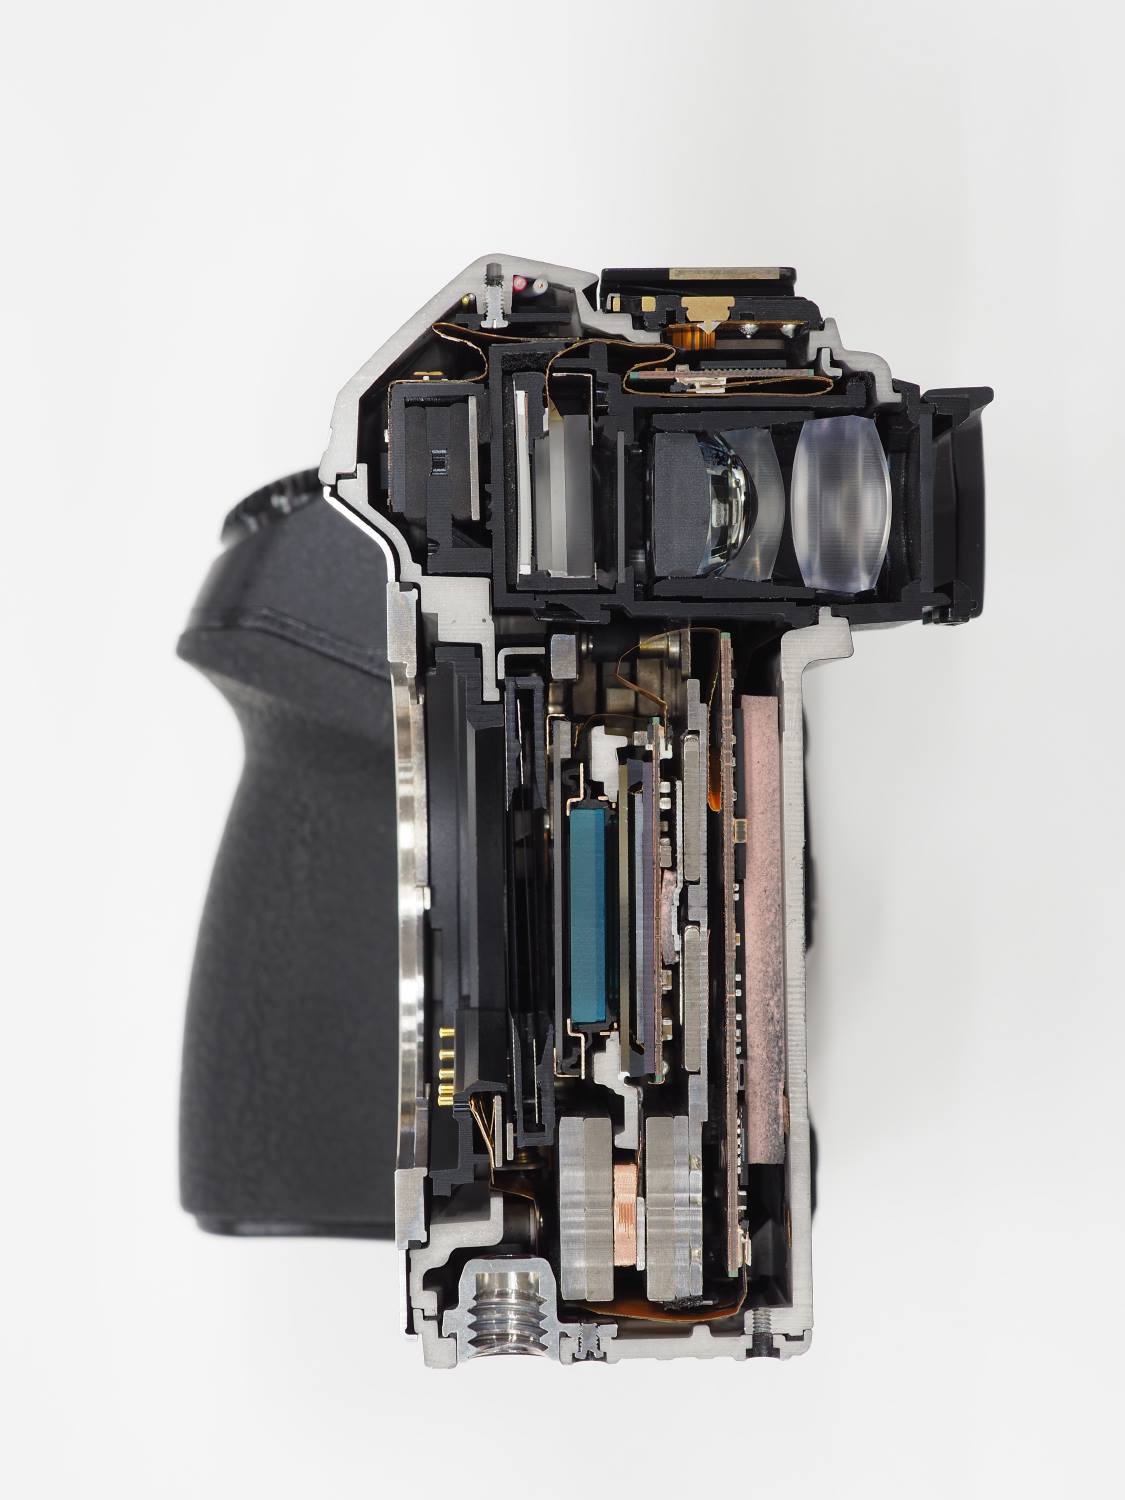 Olympus Sliced an E-M1 Mark II in Half to Show You the Insides